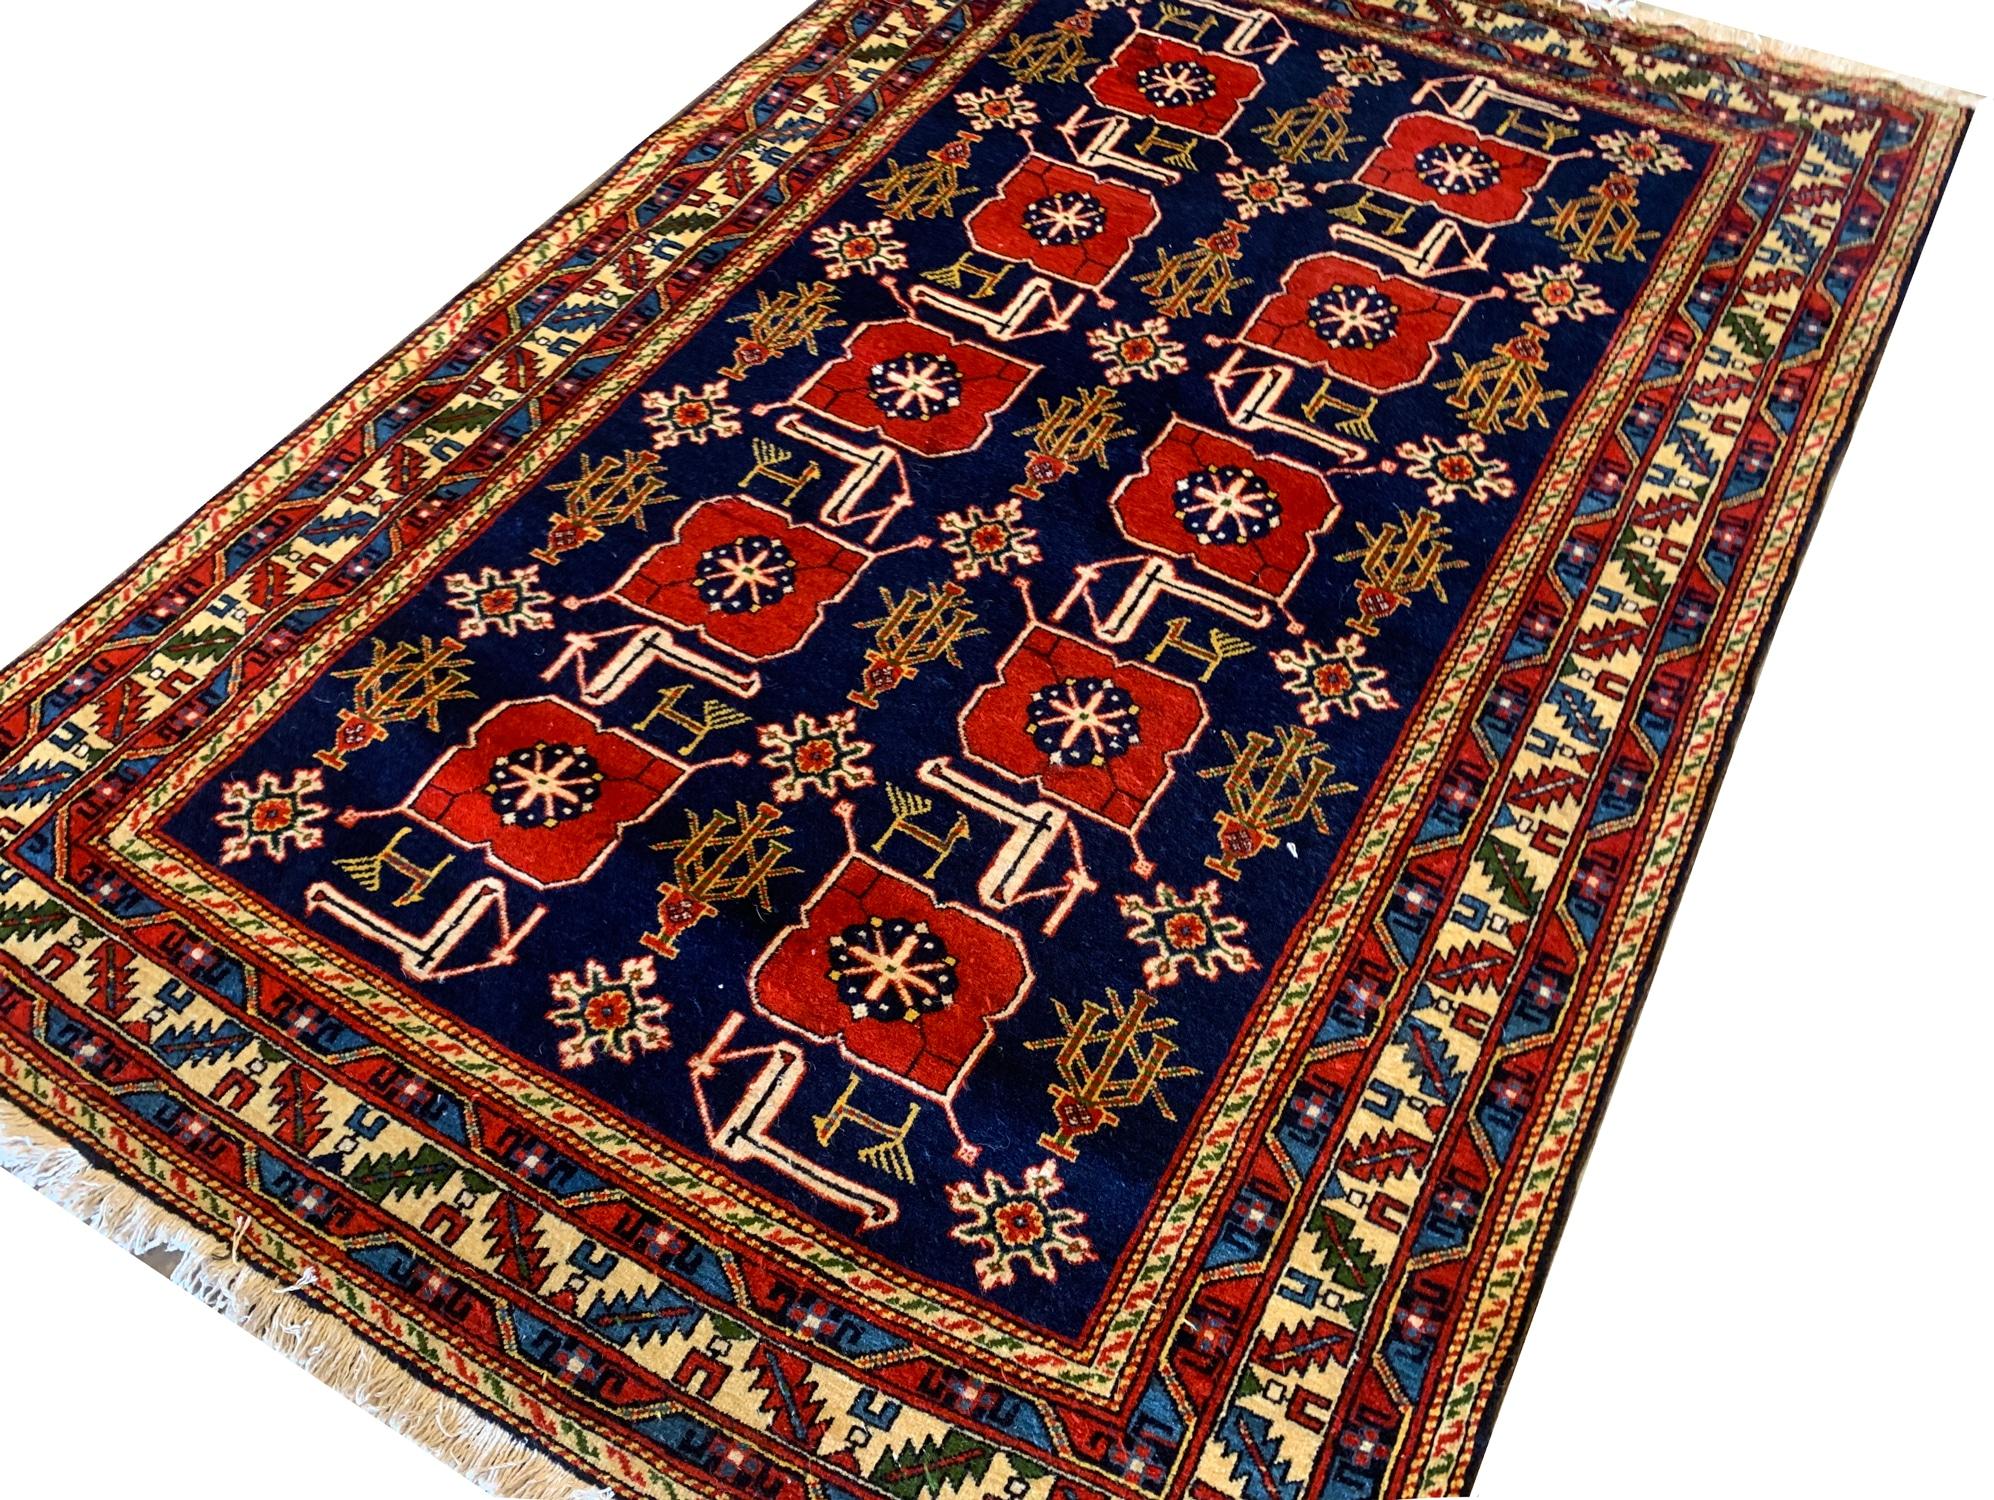 A stunning traditional Caucasian runner rug that seamlessly blends geometric design elements with captivating all over weaving. These carpets are made of all organic material including hand spun organic wool and natural vegetable dyes so they are